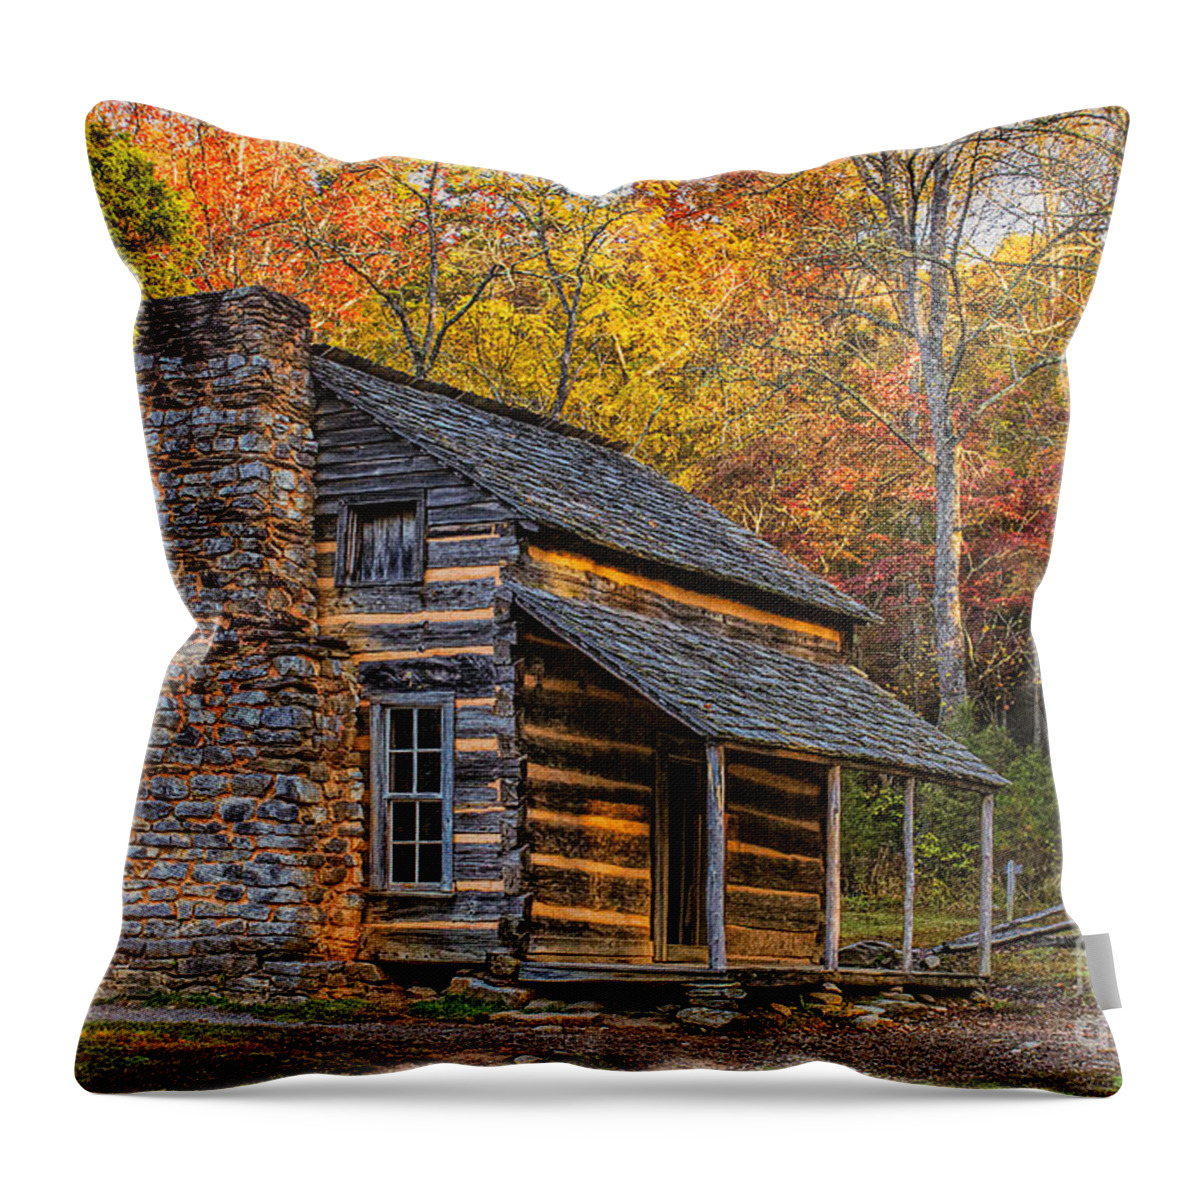 John Oliver's Cabin In Great Smoky Mountains Throw Pillow featuring the photograph John Oliver's Cabin in Great Smoky Mountains by Priscilla Burgers